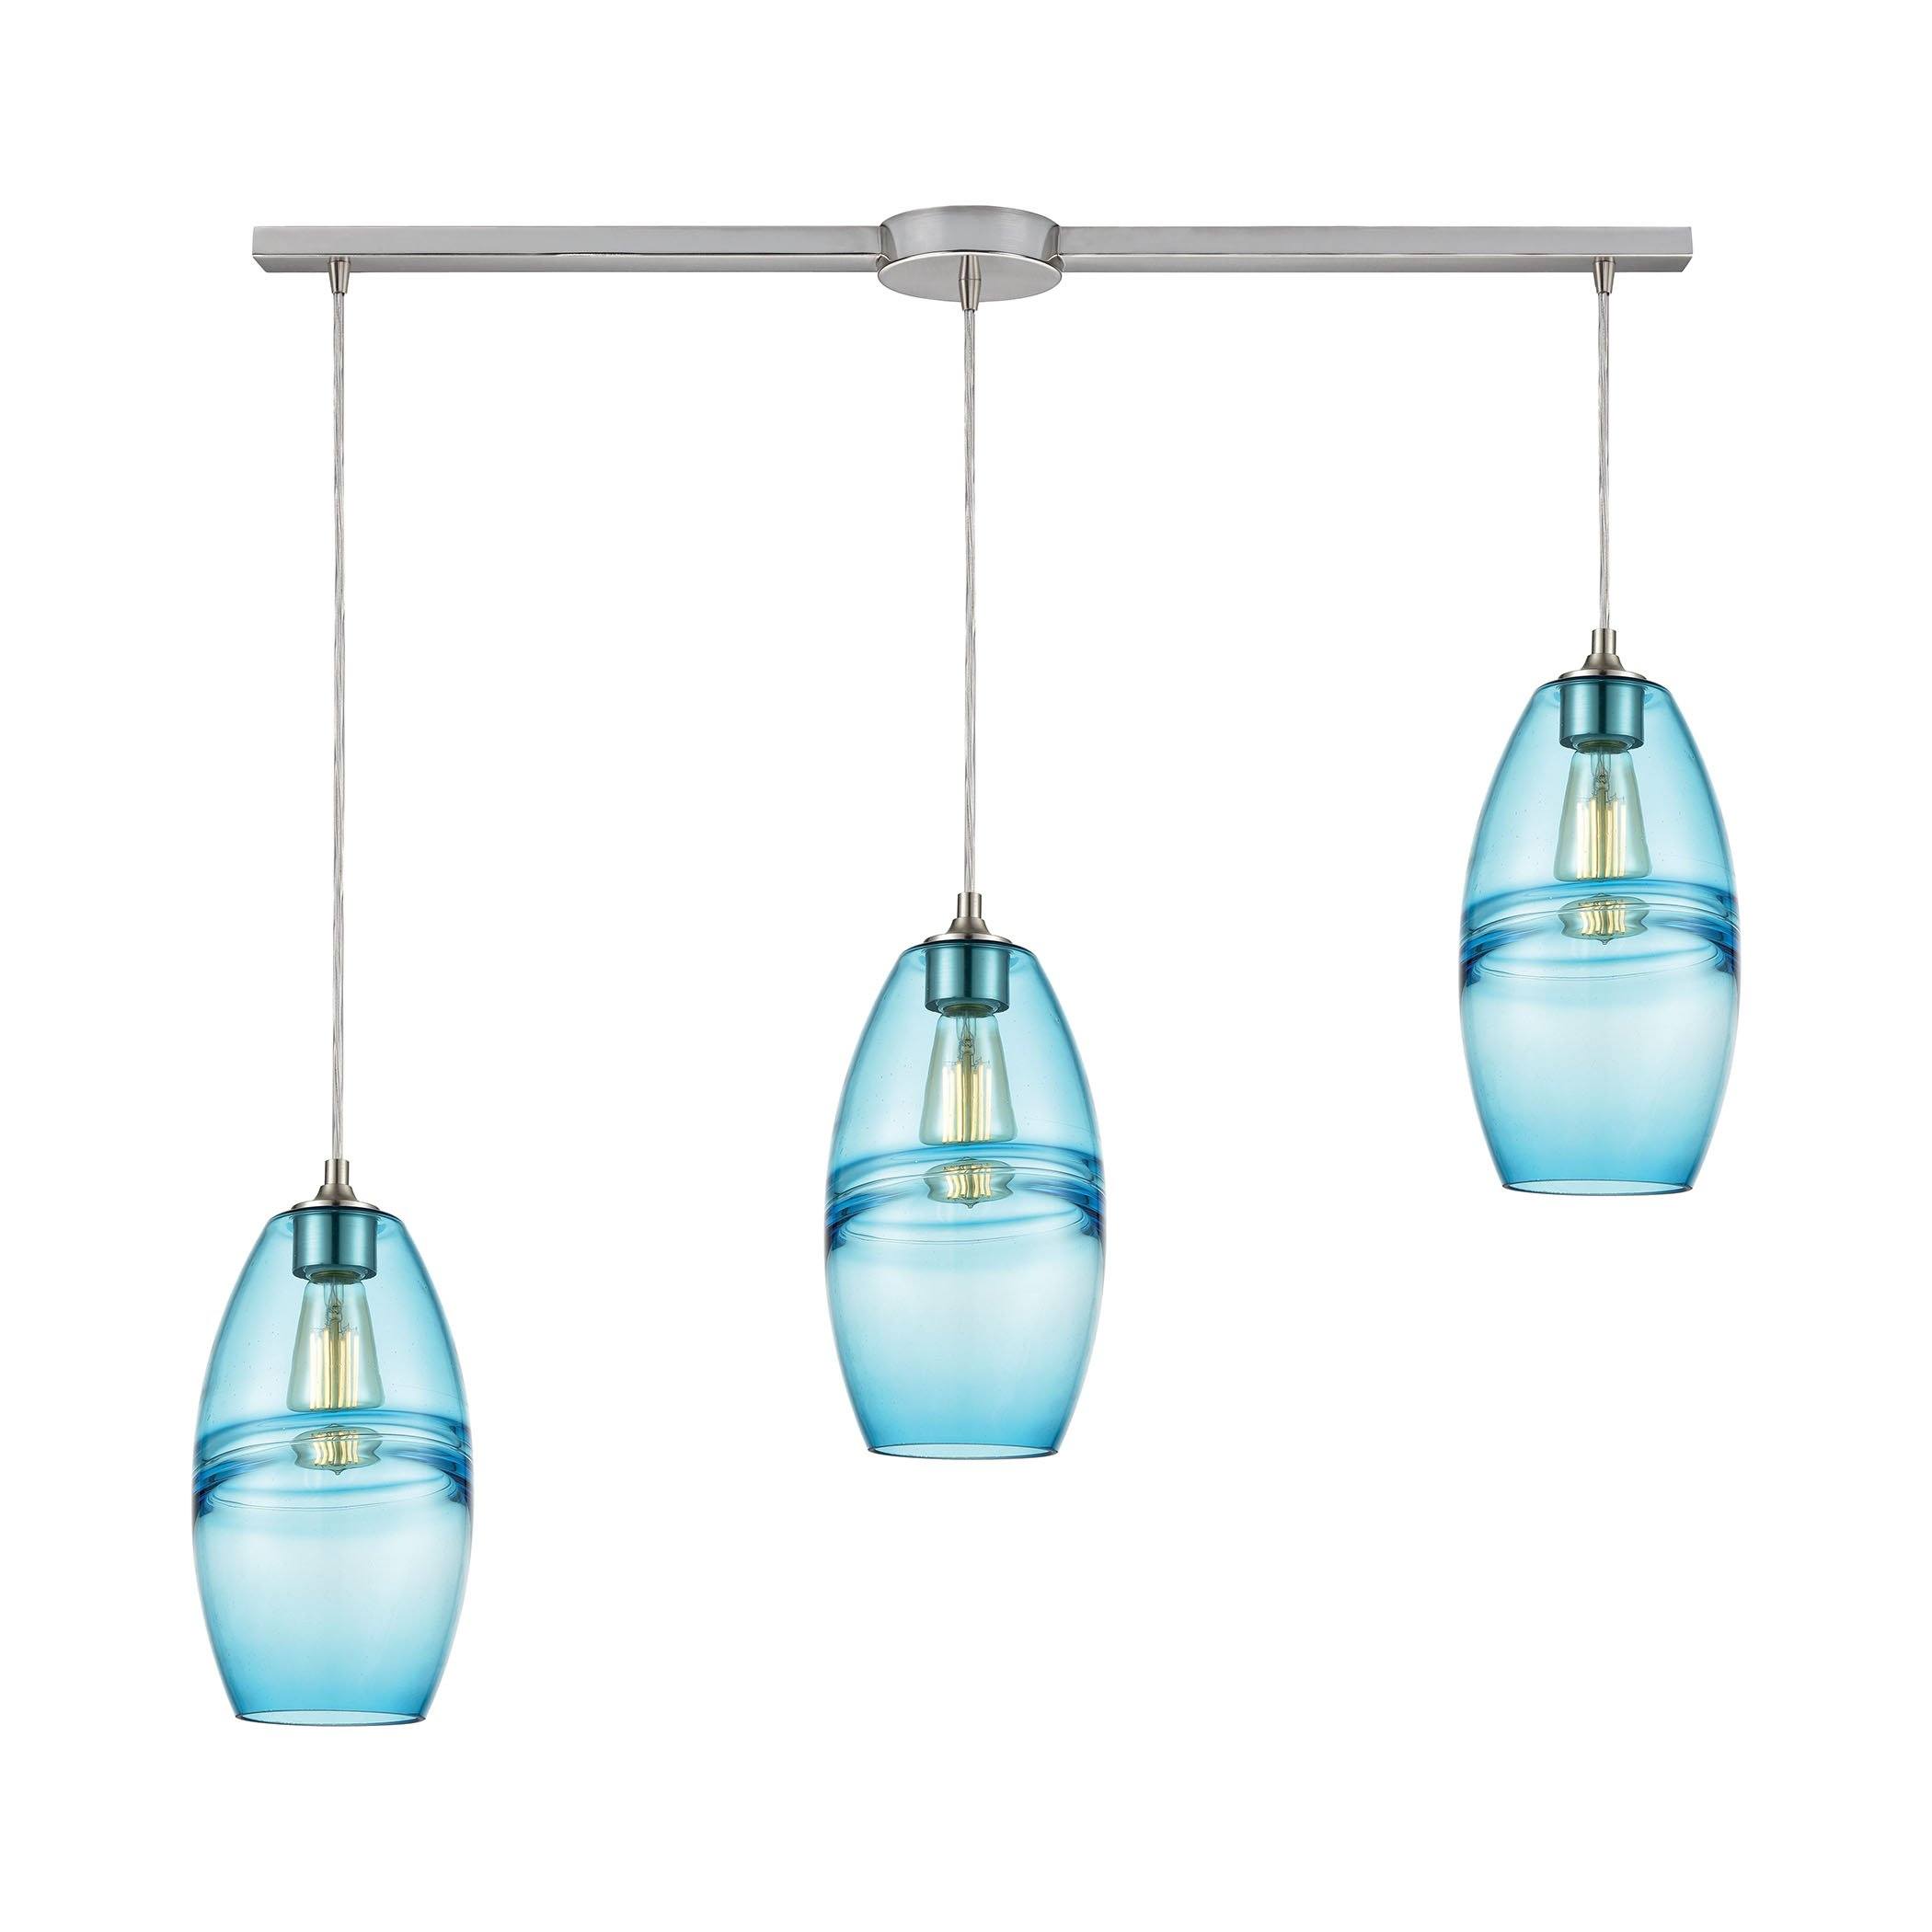 Melvin 3-Light Pendant in Satin Nickel with Aqua Fused Glass with Blue Accent Ceiling Elk Lighting 